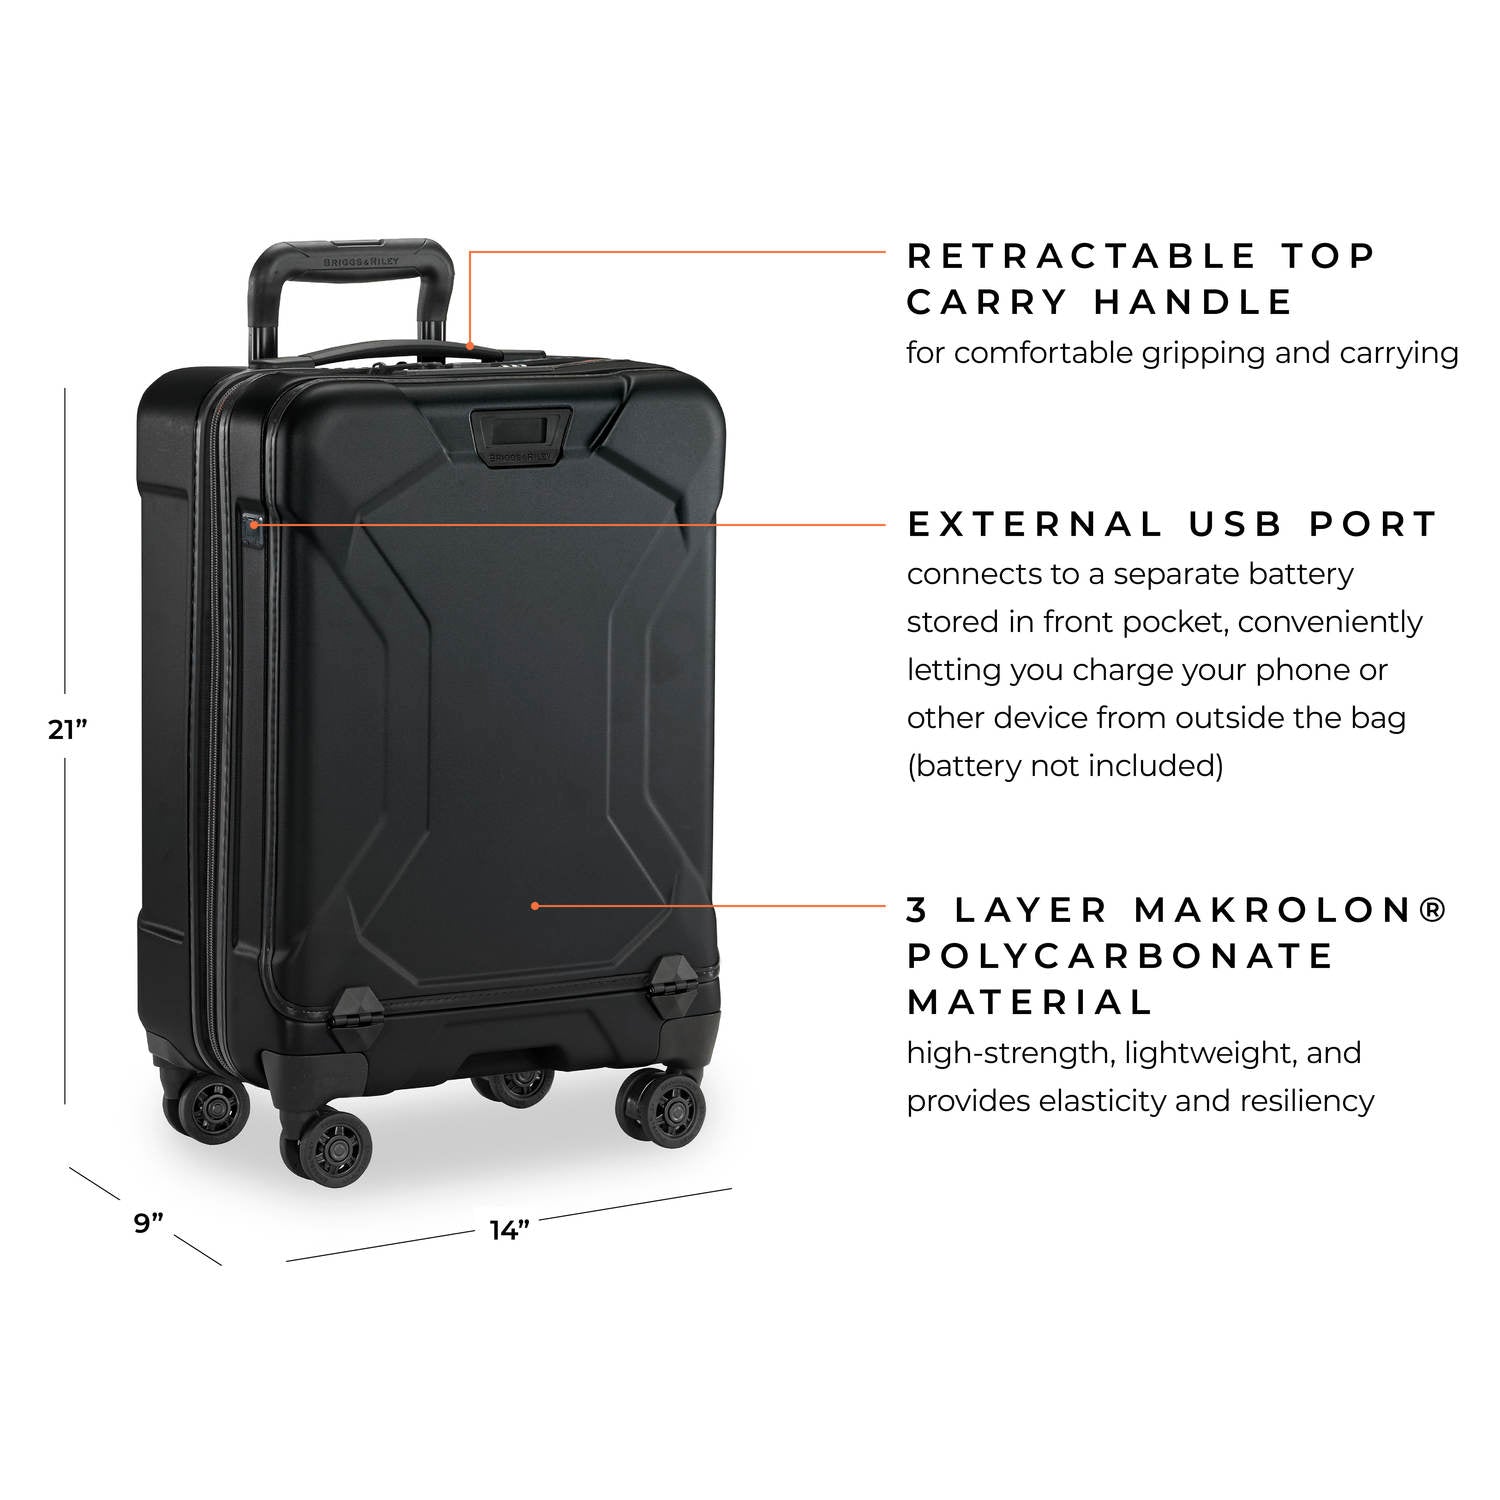 briggs & riley torq black international 21" carry-on spinner retractable top carry handle for comfortable gripping and carrying,, external usb port connects to a seperate battery stored in front pocket, conveniently letting you charge your phone or other device from outside the bag, 3 layer makrolon polycarbonate material high strength, lightweight, and provides elasticity and resiliency   #color_stealth